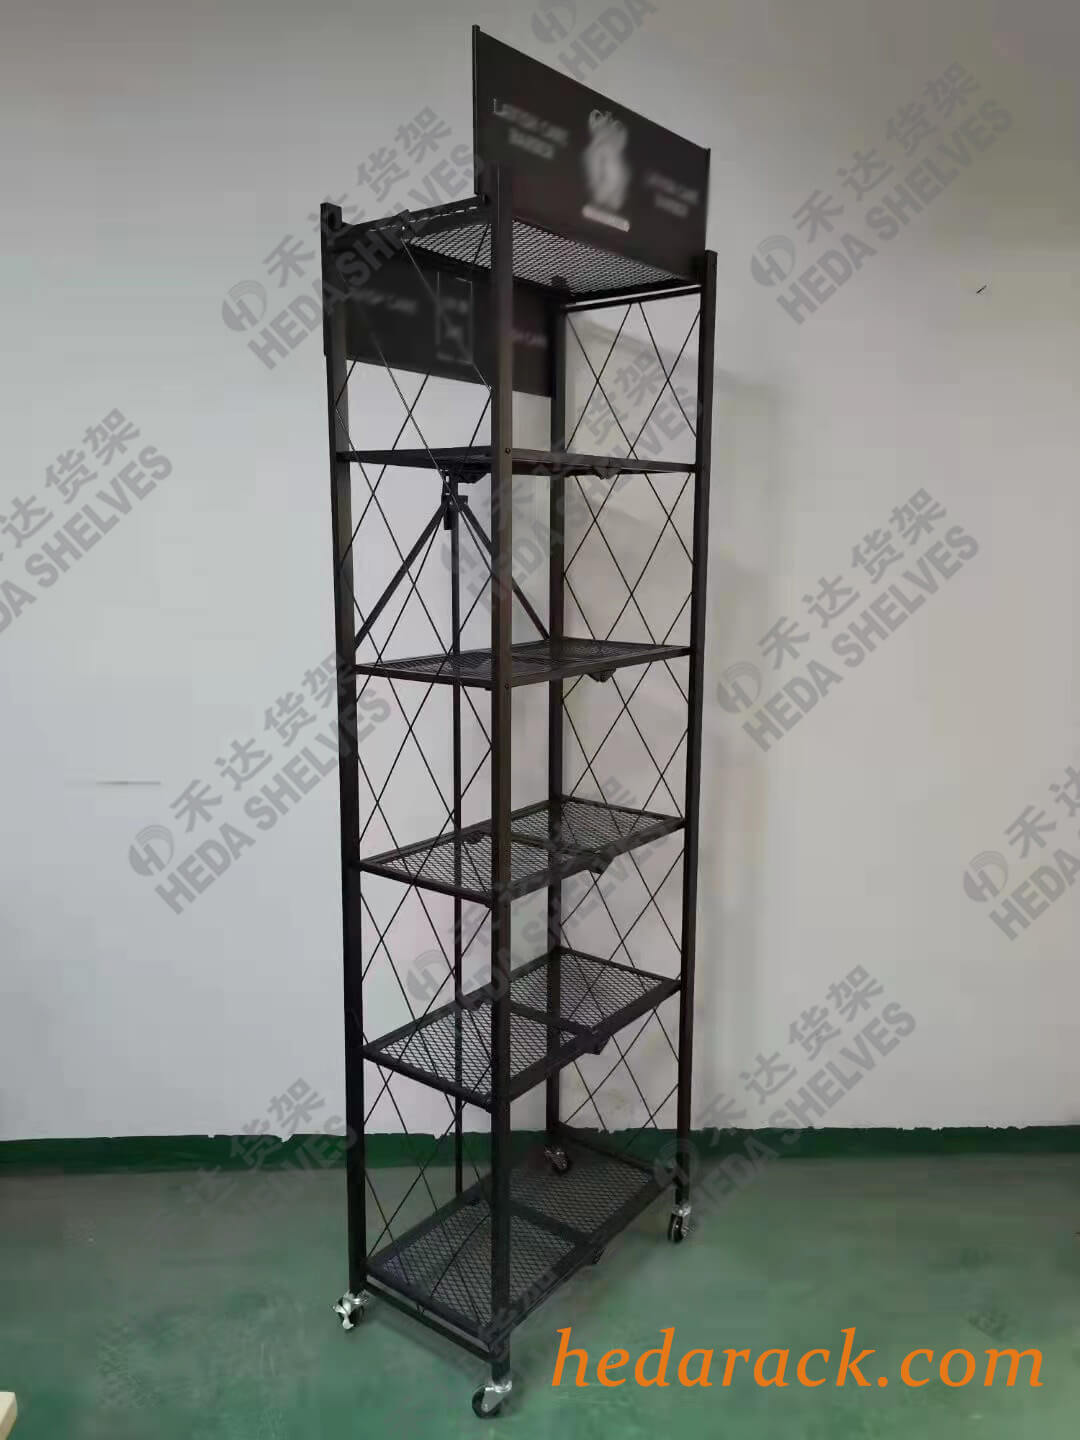 Foldable Shelving Wire Freestanding Display Origami Rack On Wheels(4